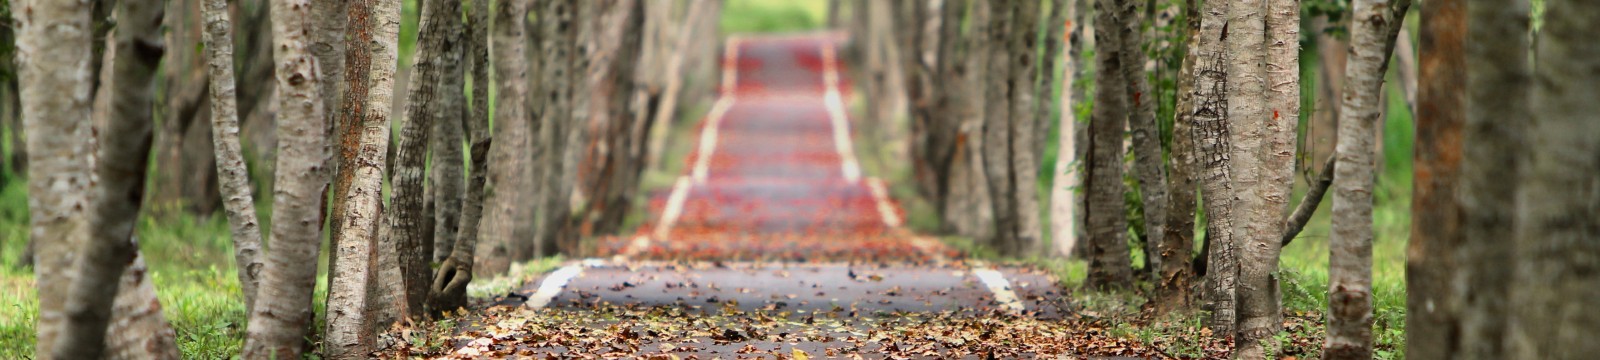 stock image of tree-lined road in the fall